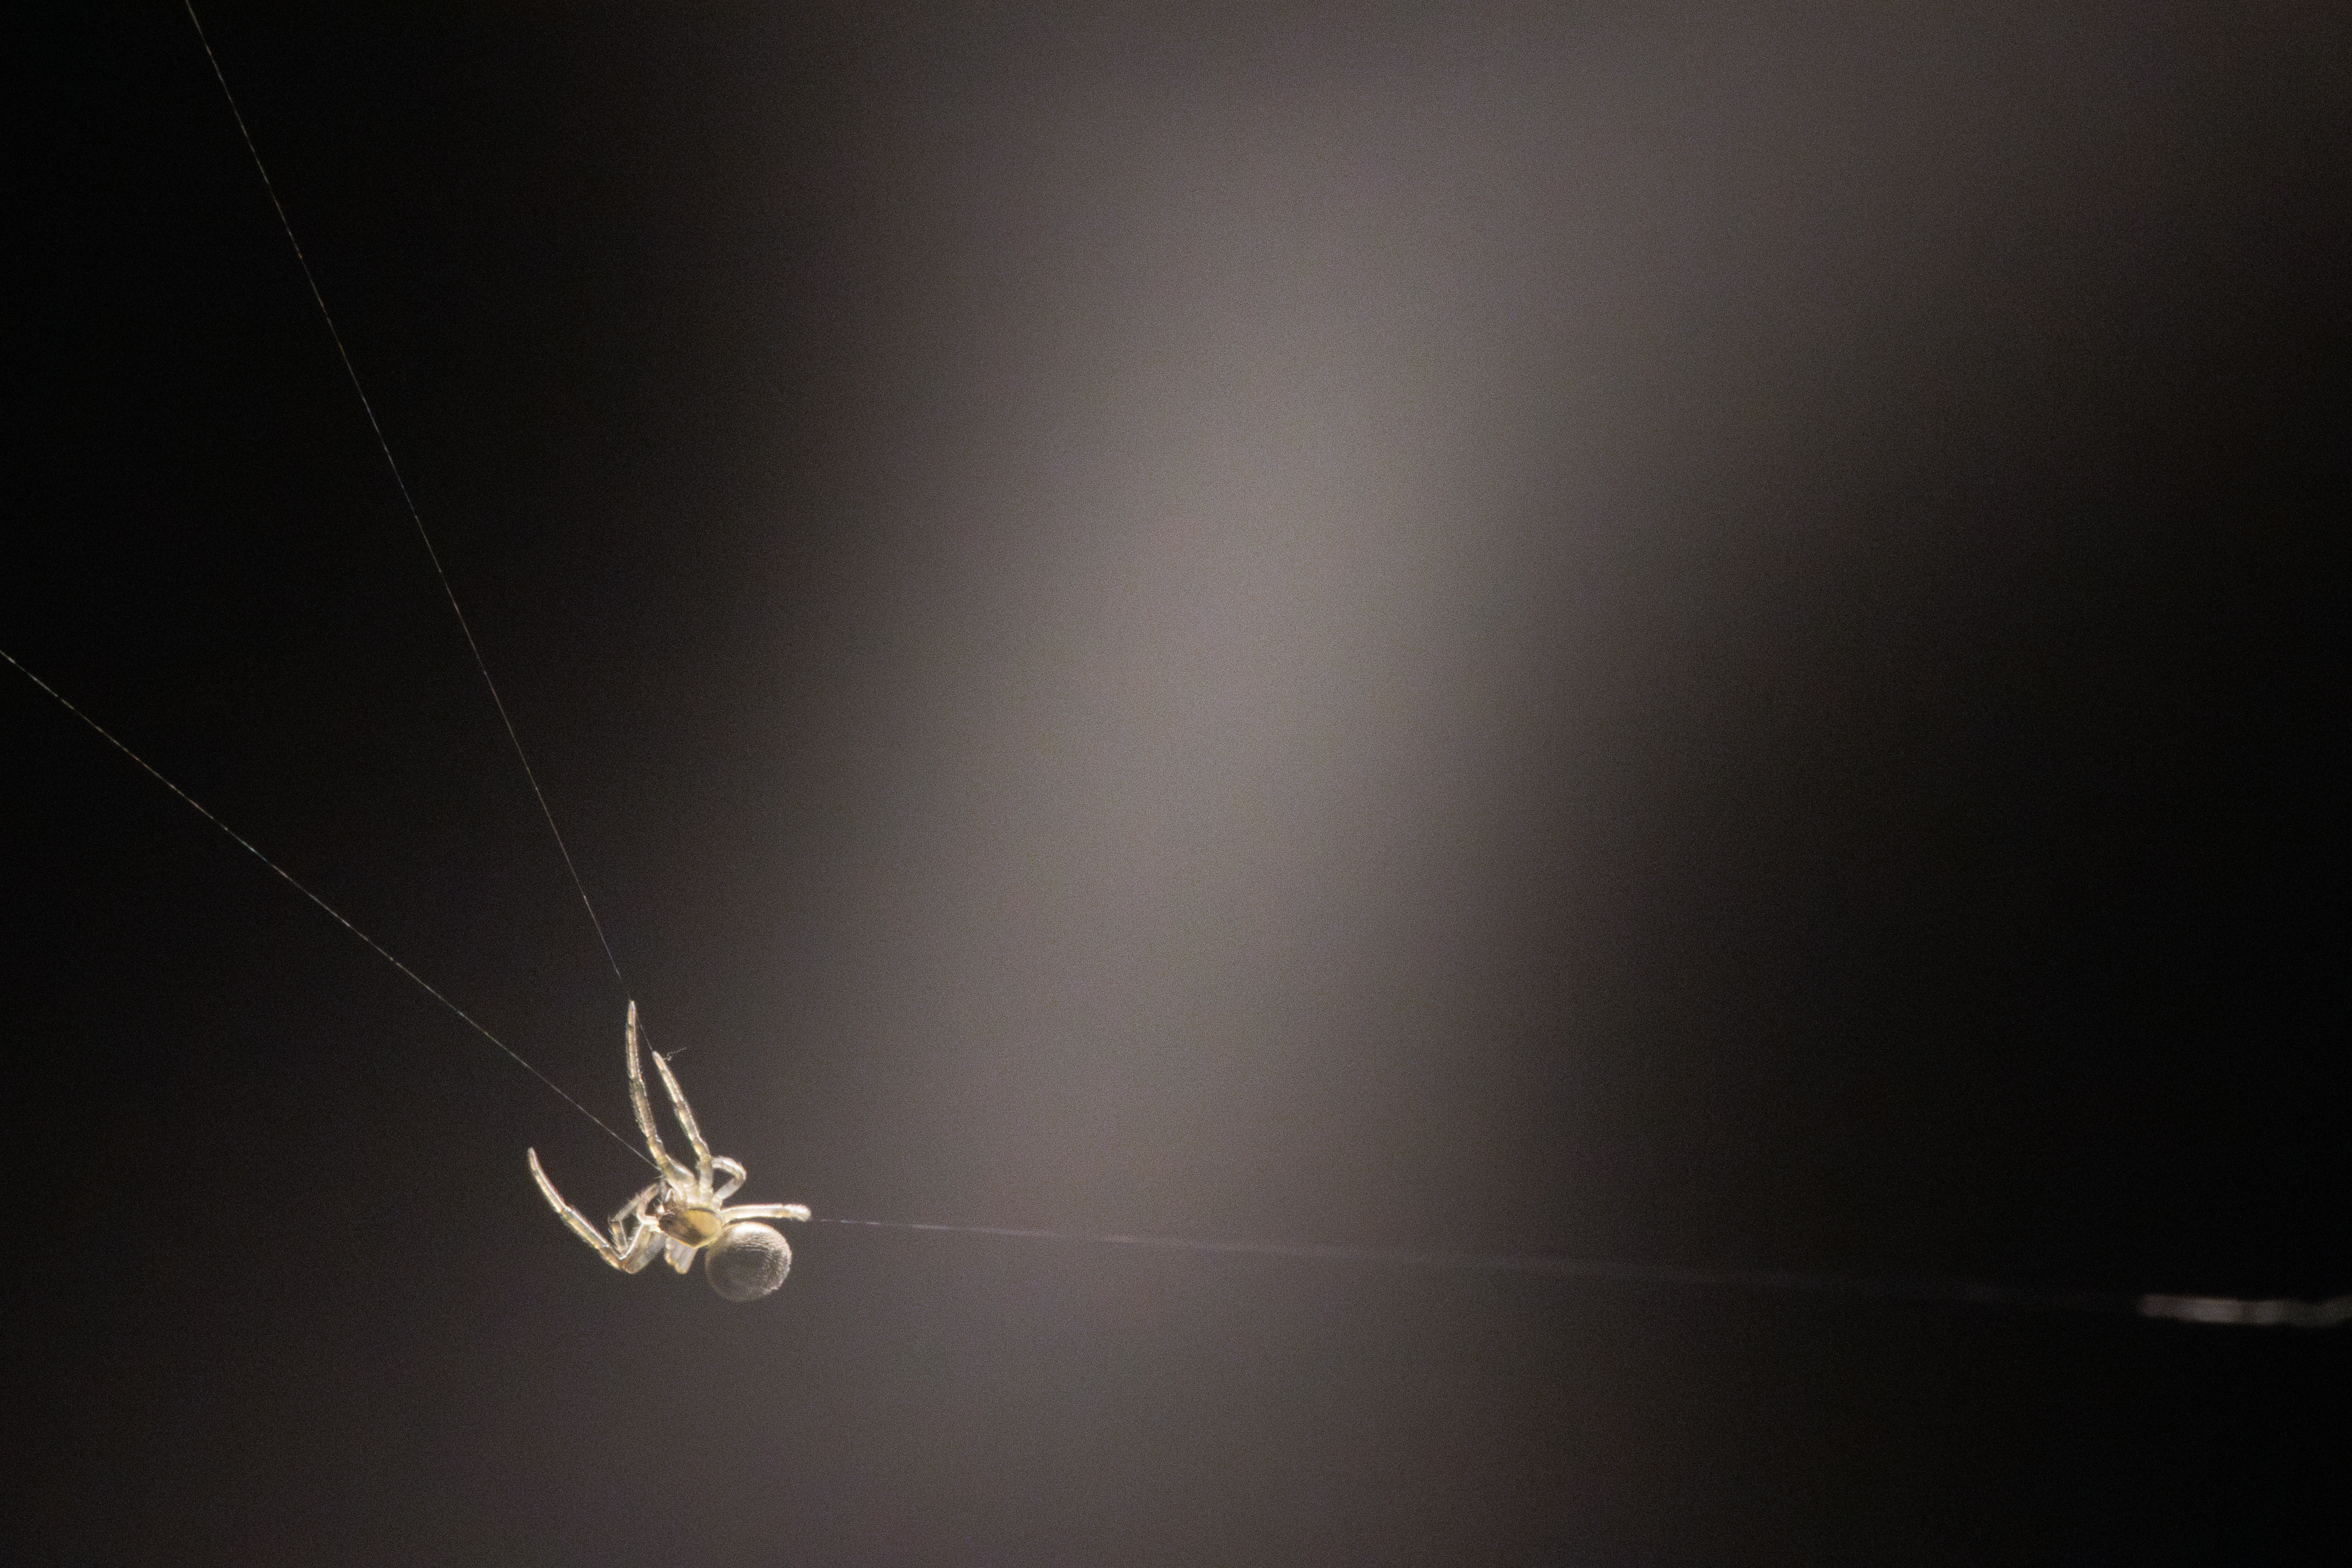 A macro shot of a spider suspended on 3 strings of its own making.